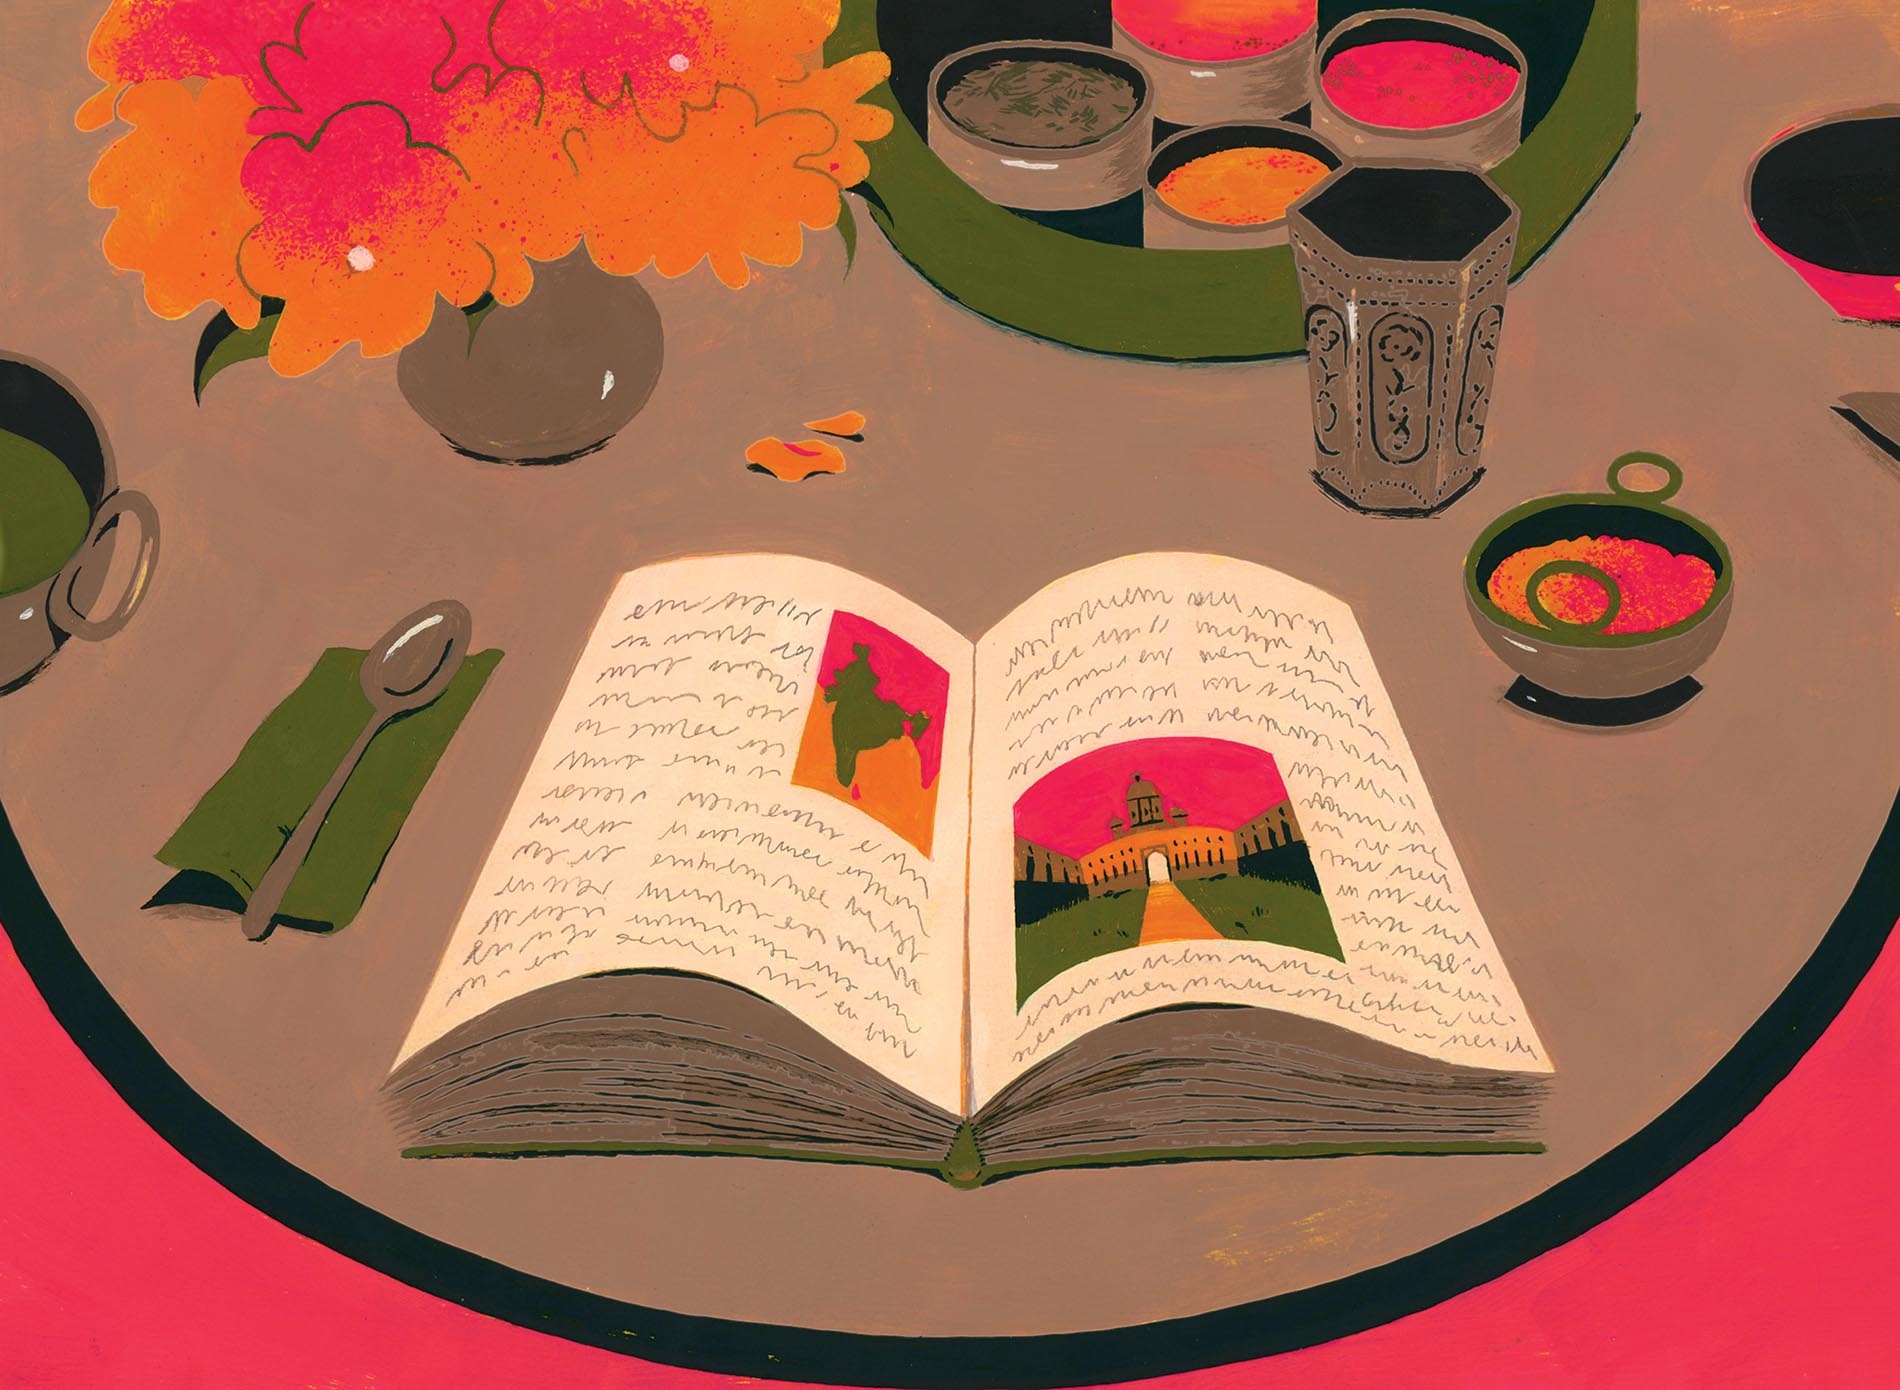 Illustration by Celia Jacobs of a dining table with a book open, flowers and bowls of condiments and a cup.